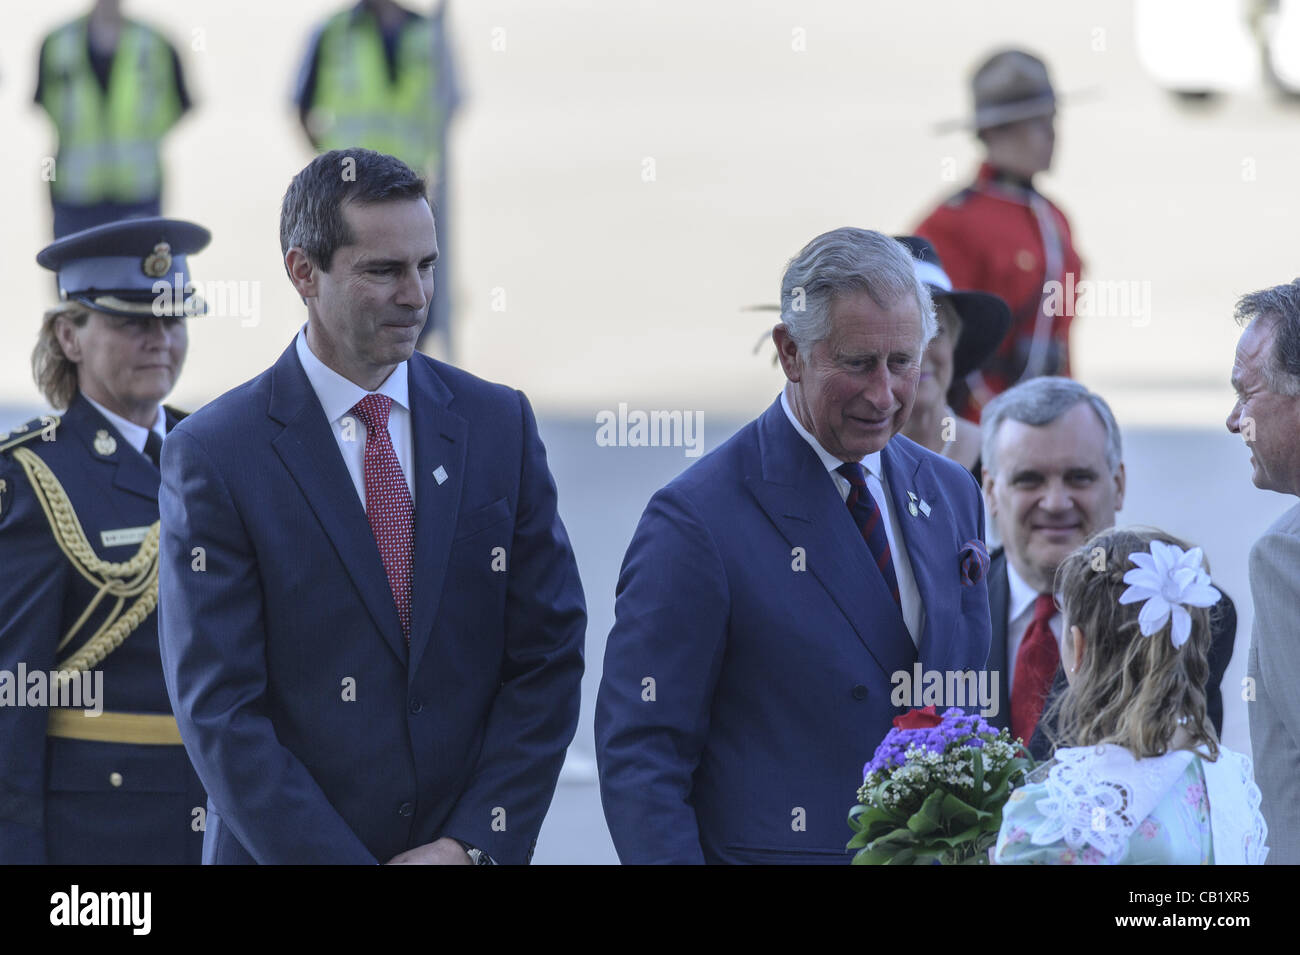 May 21, 2012 - Toronto, Ontario, Canada - PRINCE CHARLES and his wife CAMILLA, Duchess of Cornwall have kicked off the Ontario leg of their Canadian tour. In picture - Ontratio Premier DALTON MCGUINTY, PRINCE CHARLES, Ontario Lieutenant Governor DAVID ONLEY, MORGAN MARIE FREMLIN. (Credit Image: © Ig Stock Photo